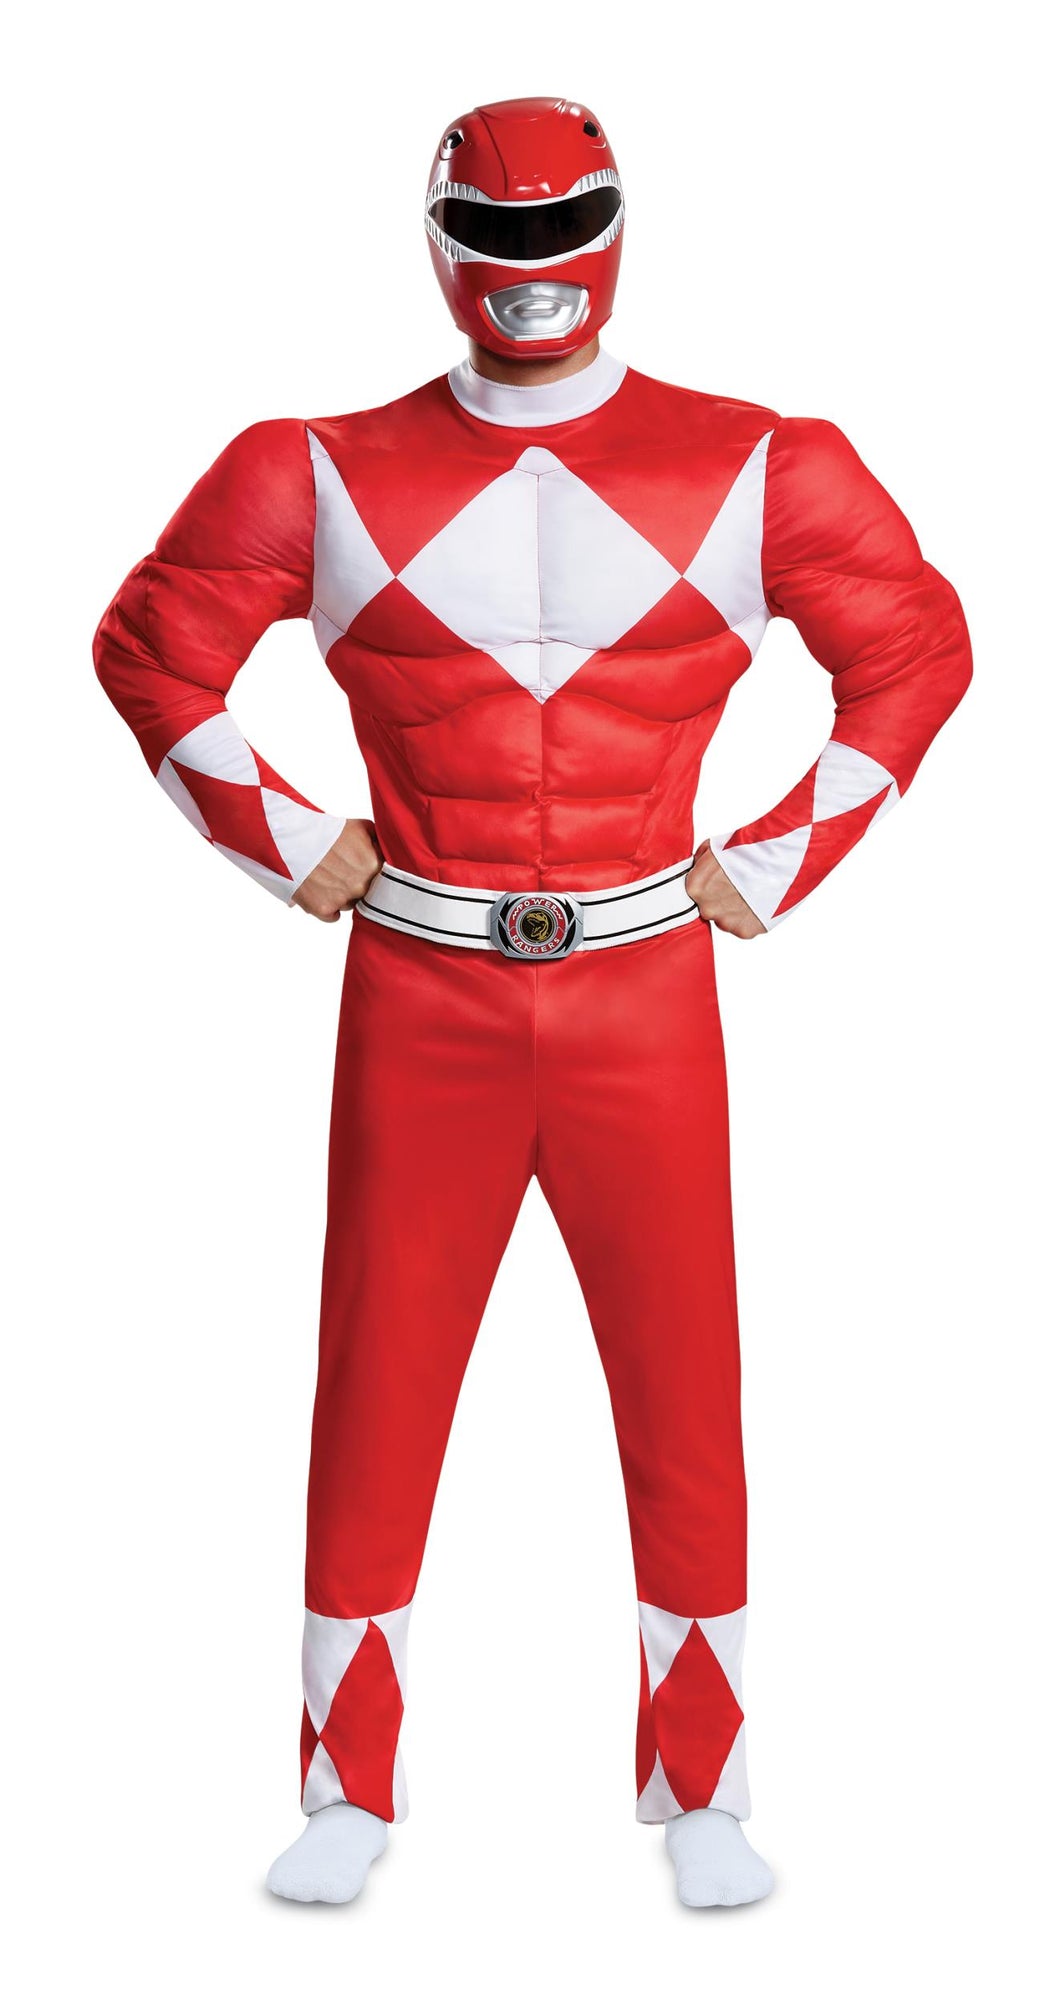 Red Ranger Power Rangers Classic Deluxe Adult Costume XL 42-46